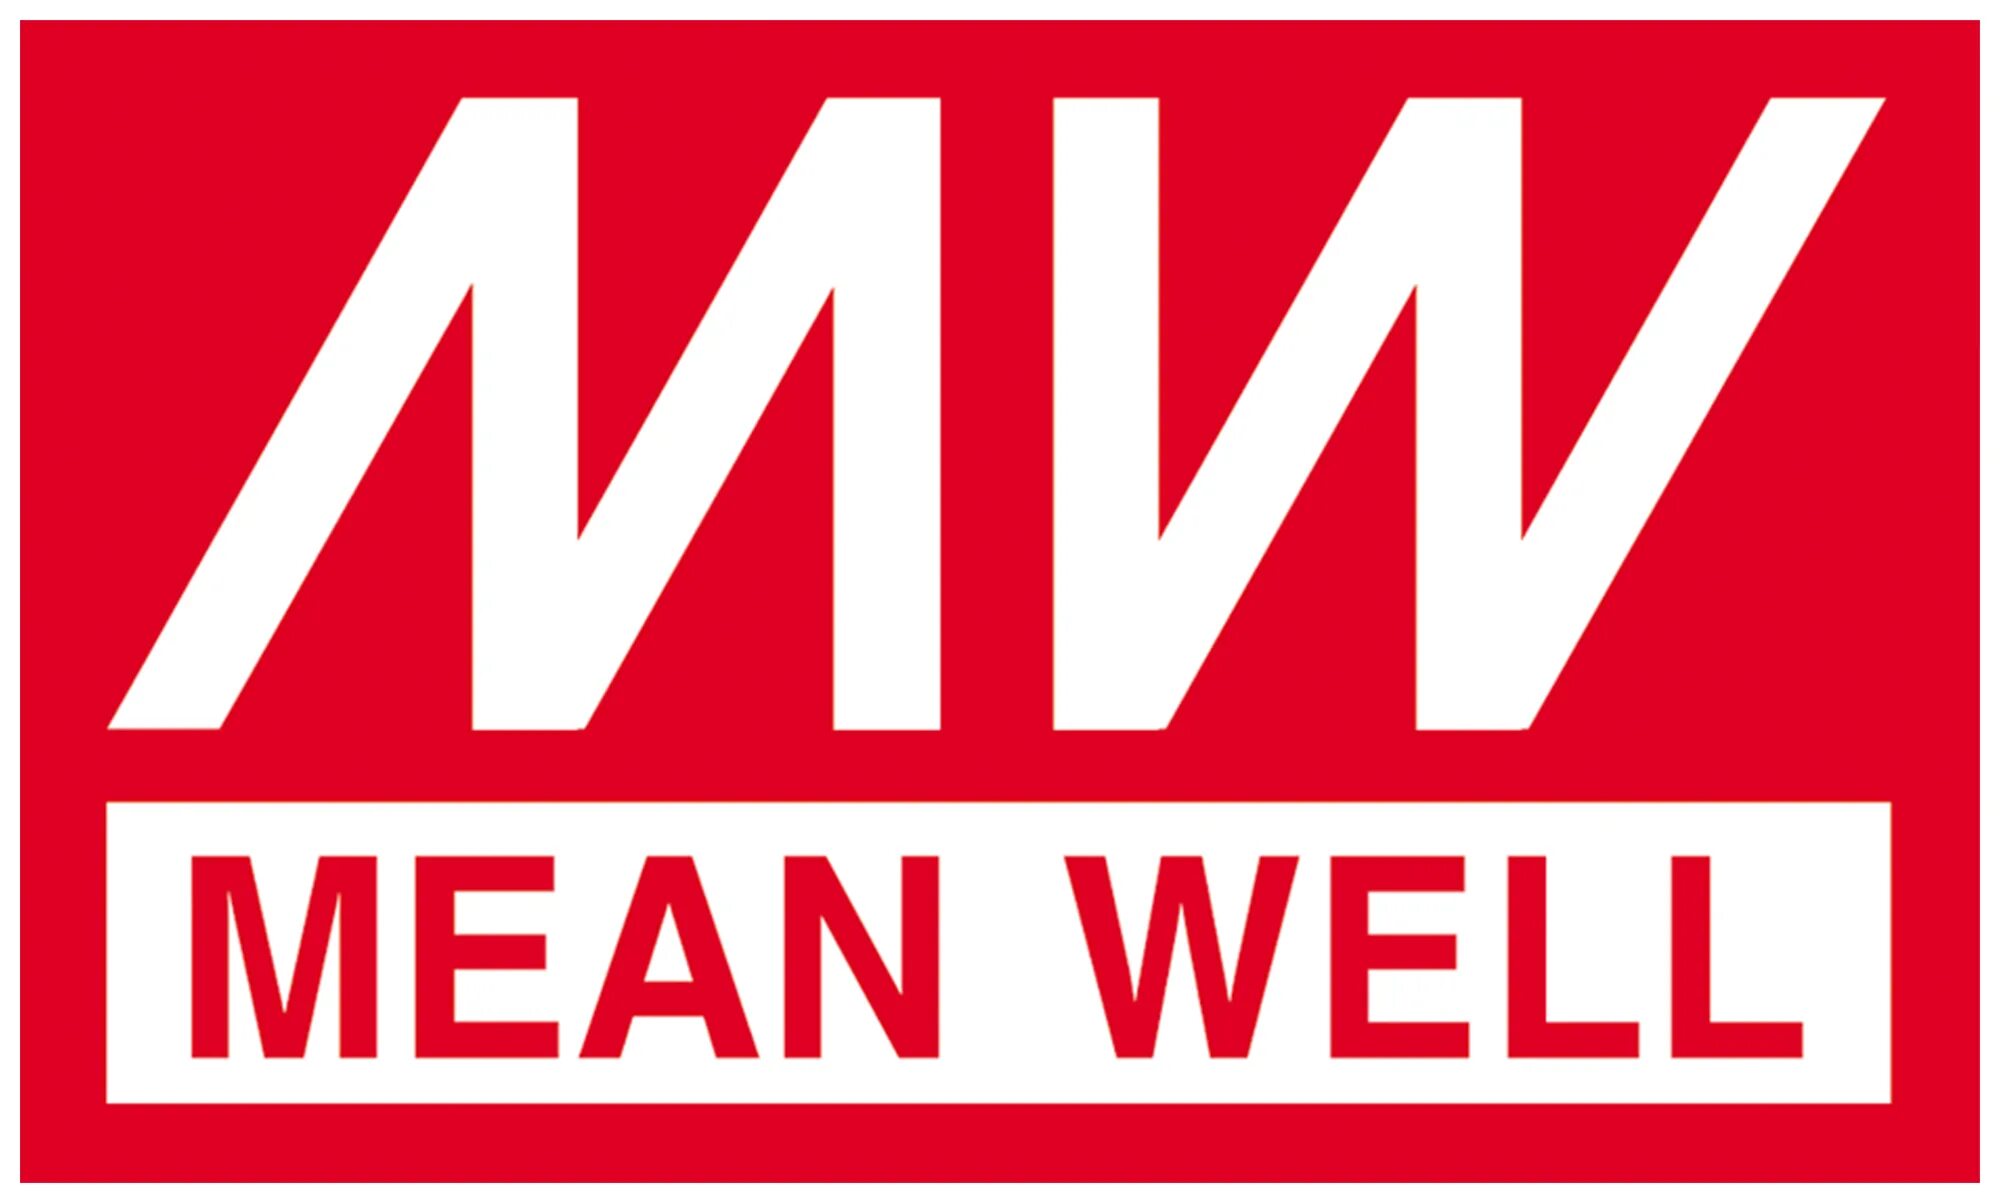 Mean well. Mean well logo. Mean well бренд. БП meanwell.